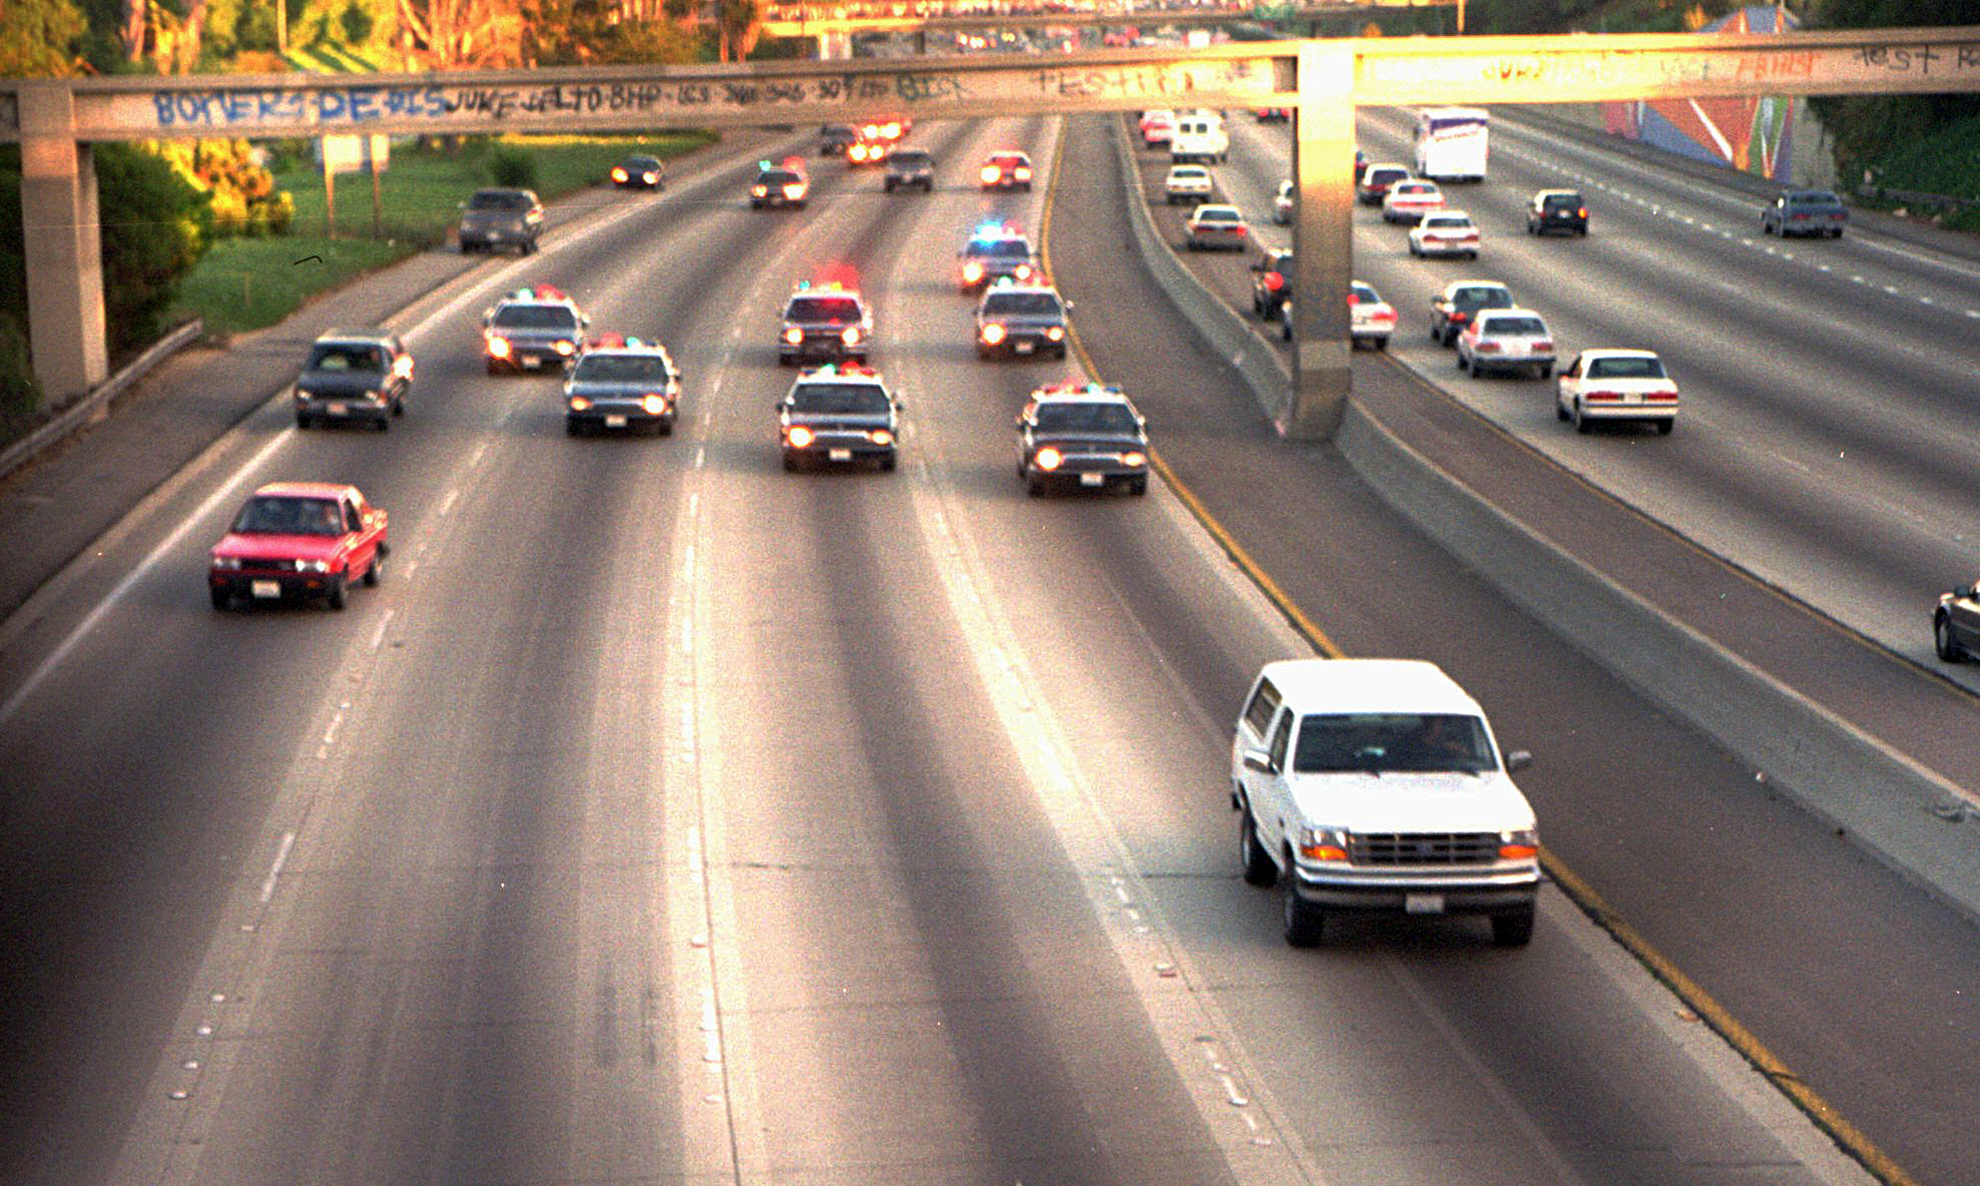 PHOTO: In this June 17, 1994 file photo, a white Ford Bronco, driven by Al Cowlings carrying O.J. Simpson, is trailed by Los Angeles police cars as it travels on a Southern California freeway in Los Angeles. 